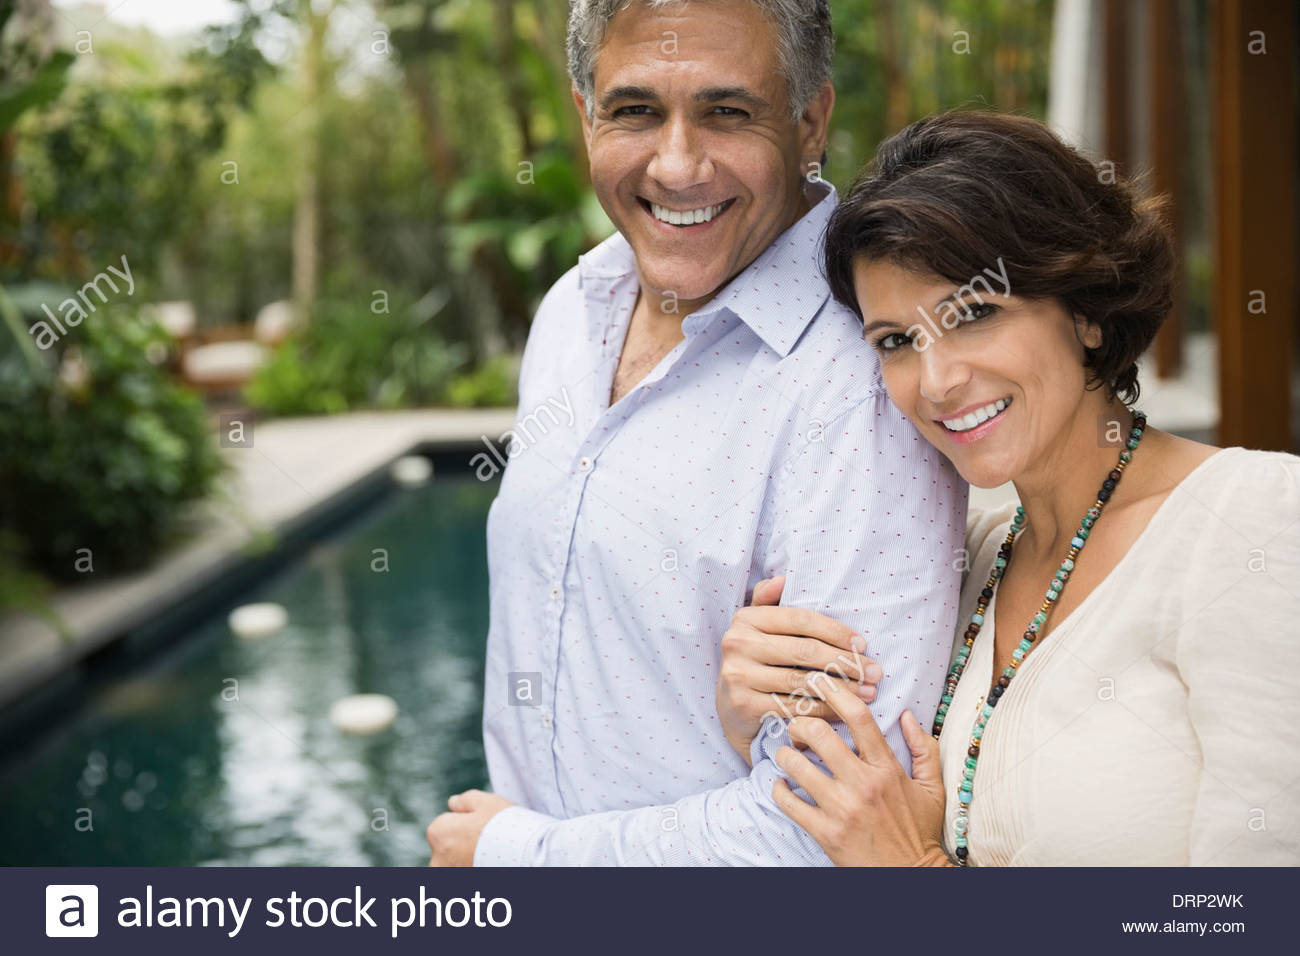 Portrait of mature couple standing outdoors Stock Photo